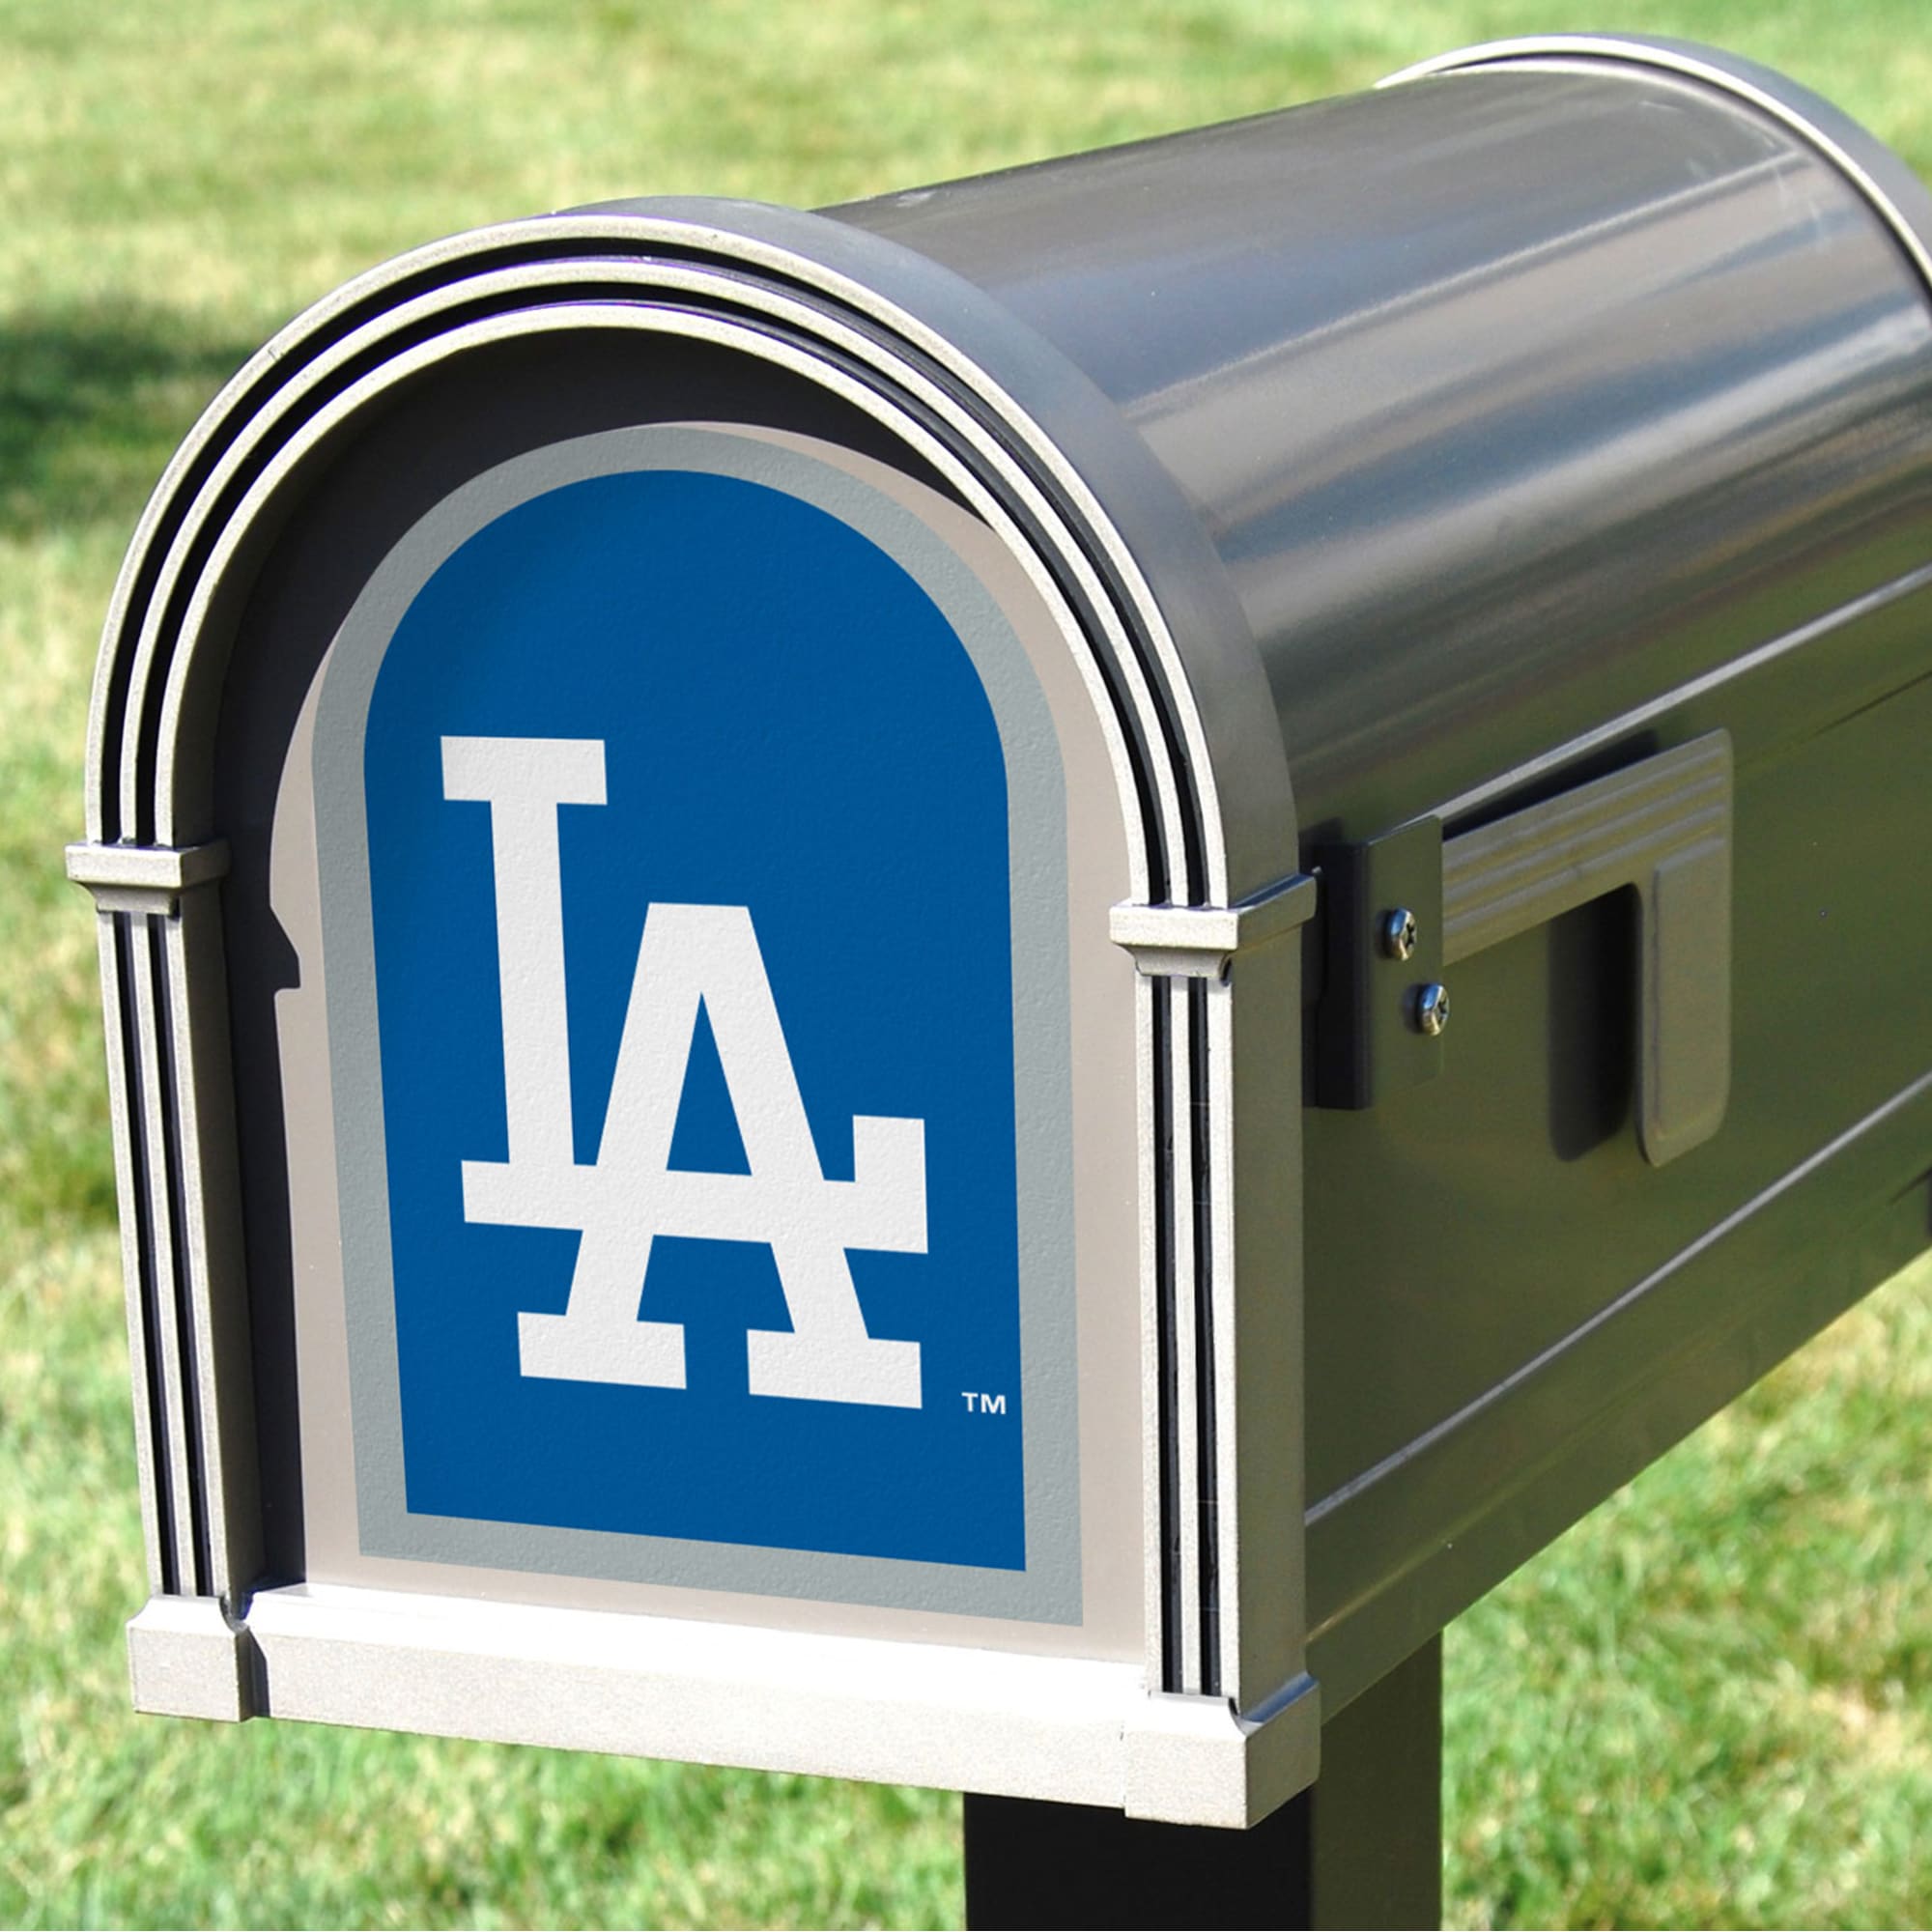 Los Angeles Dodgers: Mailbox Logo - Officially Licensed MLB Outdoor Graphic 5.0"W x 8.0"H by Fathead | Wood/Aluminum